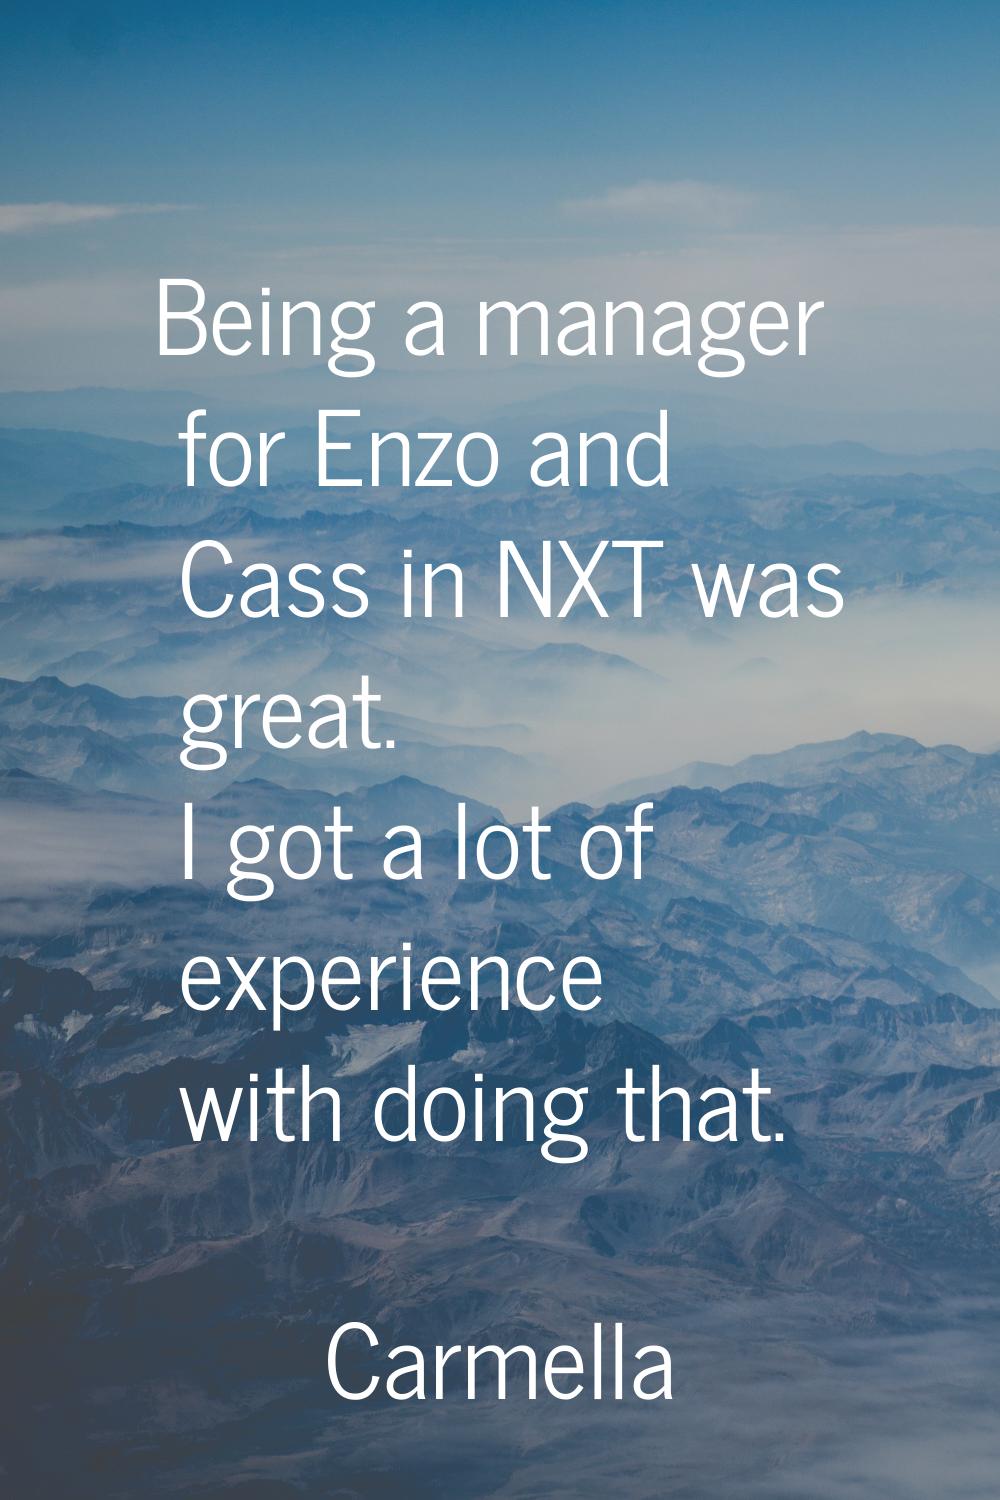 Being a manager for Enzo and Cass in NXT was great. I got a lot of experience with doing that.